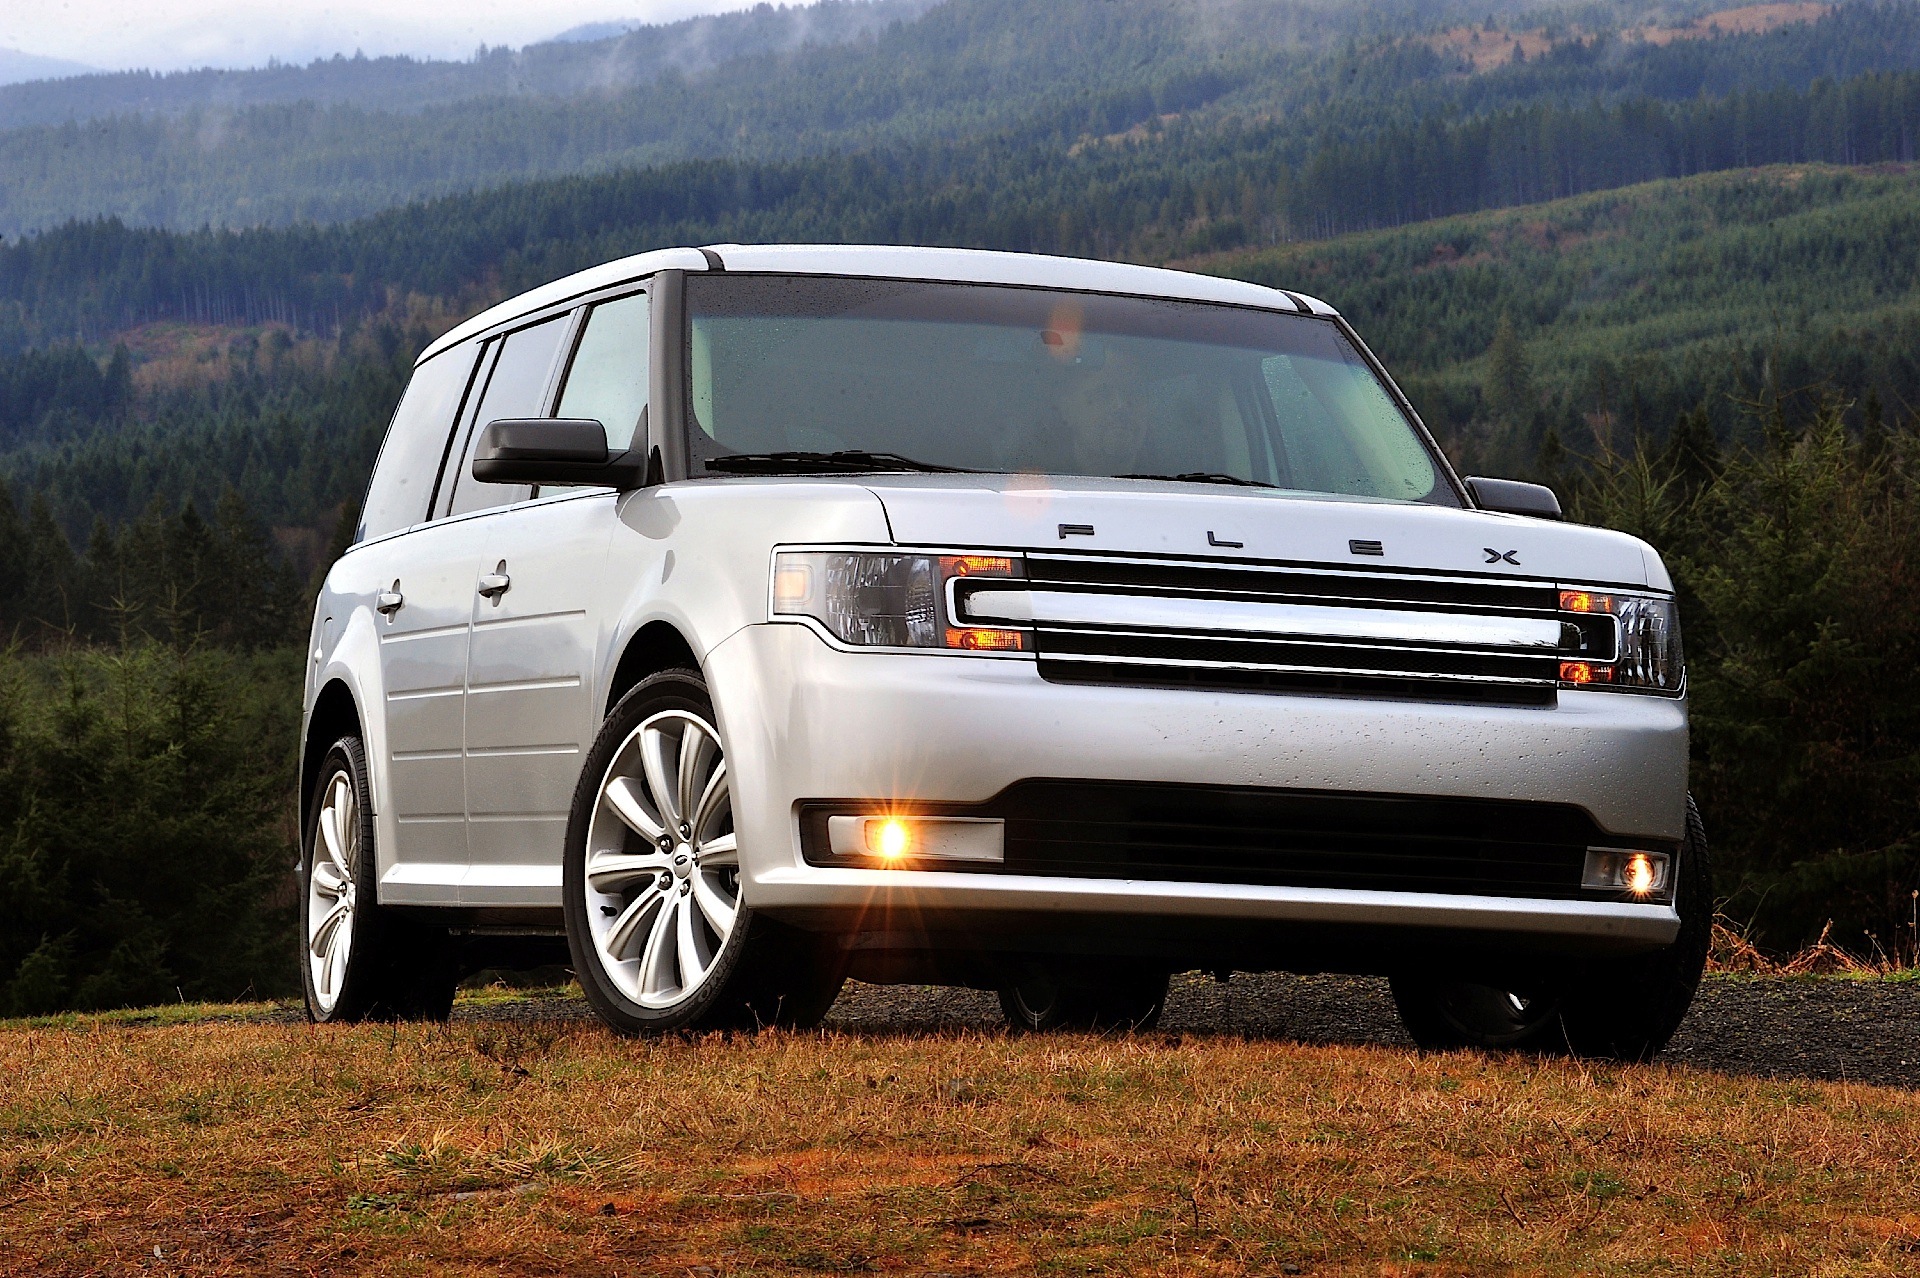 2021 Ford Flex - 2021 Ford Flex Comeback: Rumors and Expectations ...